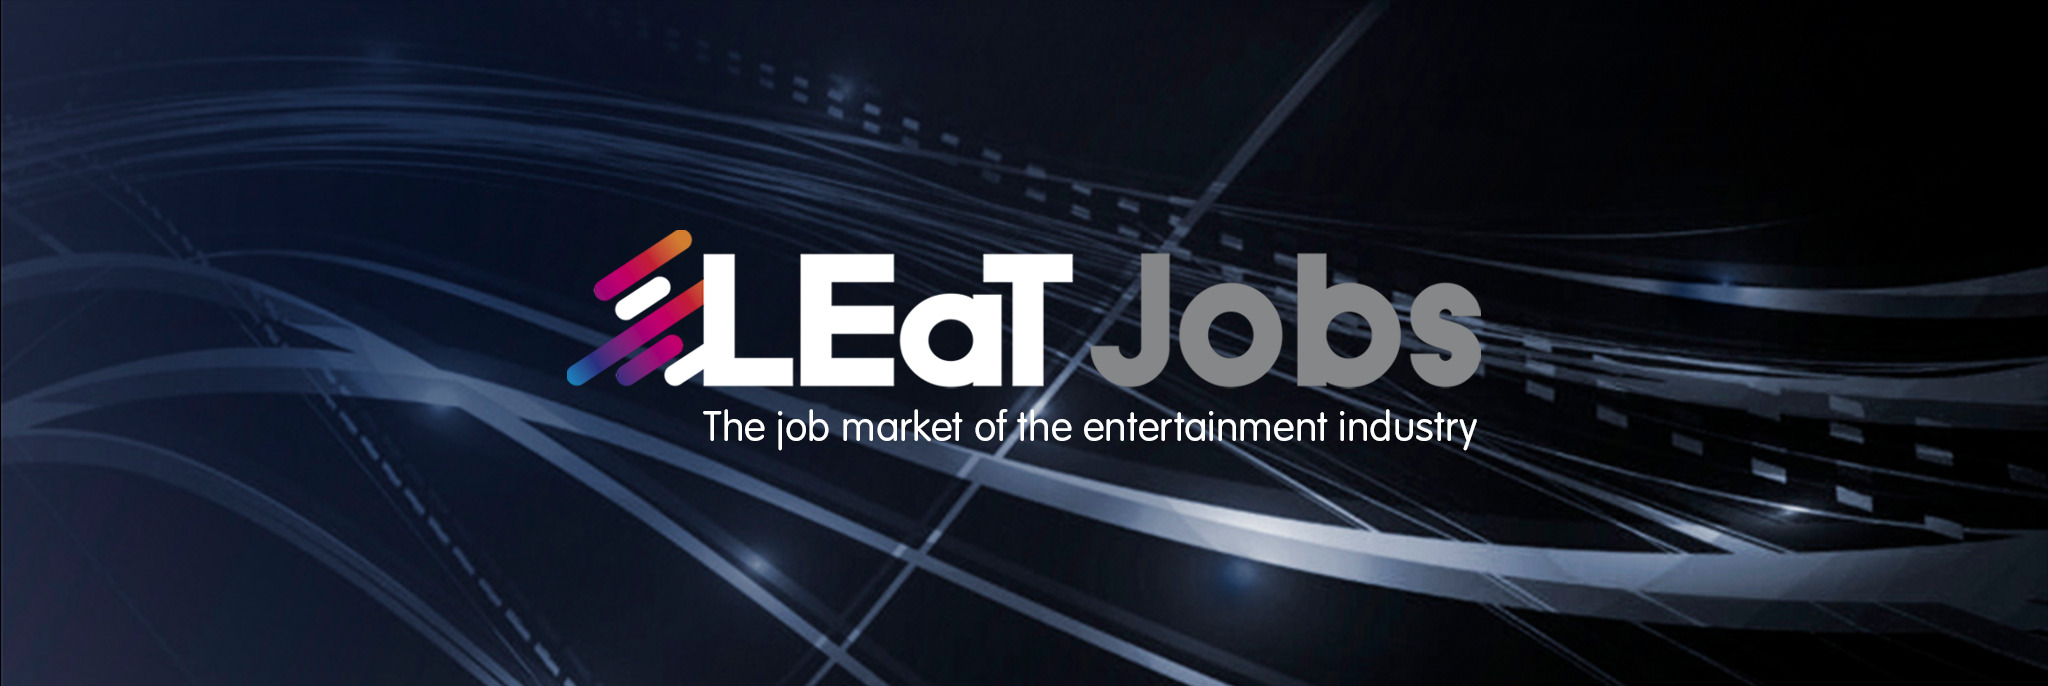 LEaT Jobs the job market of the entertainment industry